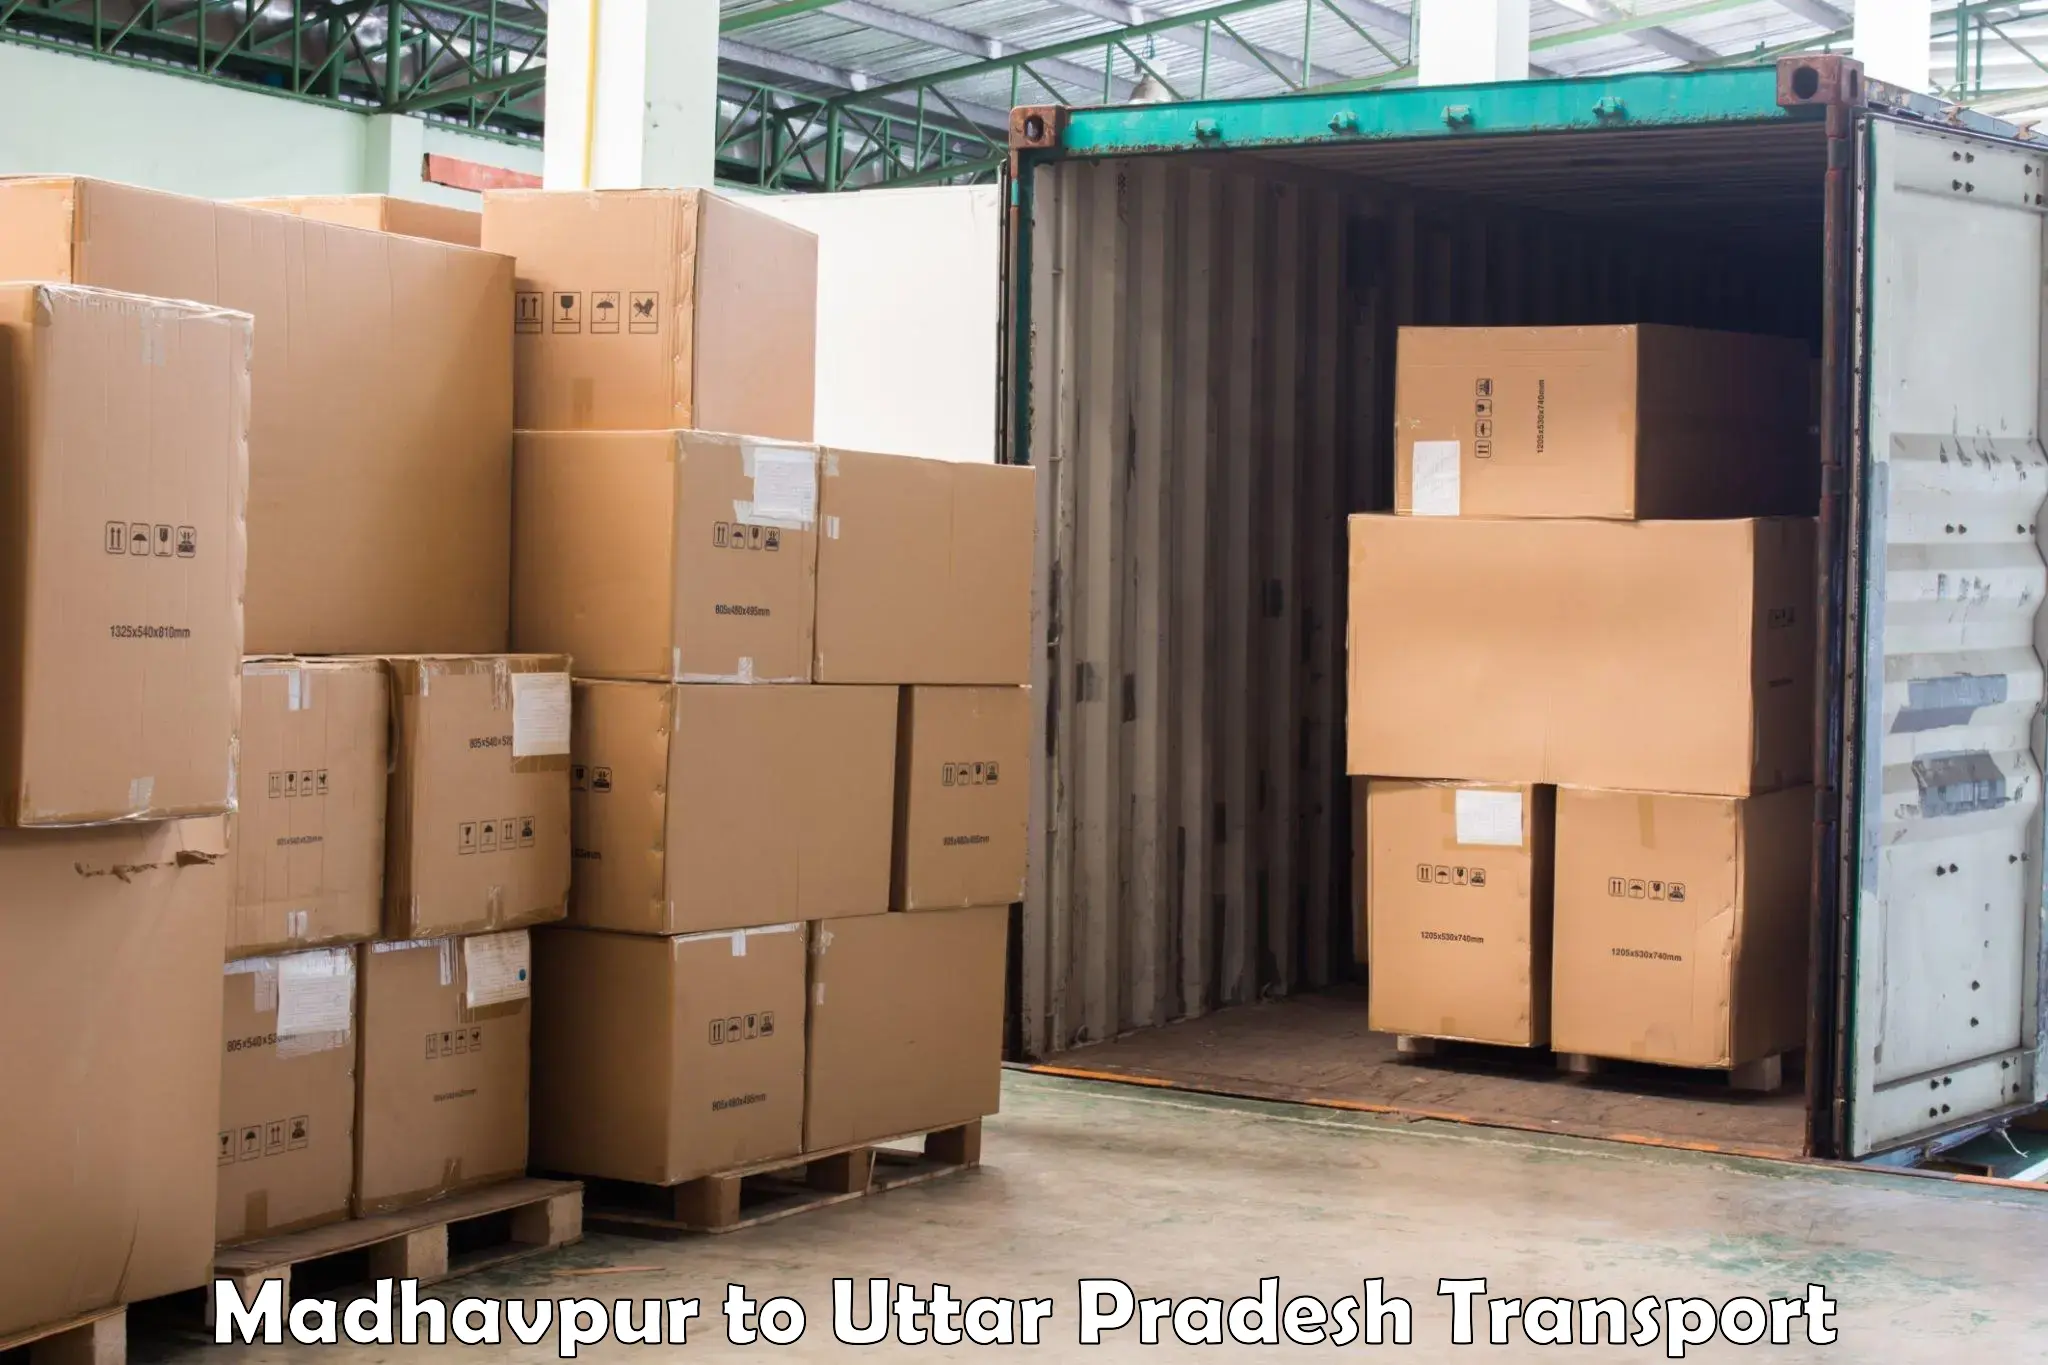 Transport shared services Madhavpur to Lalitpur